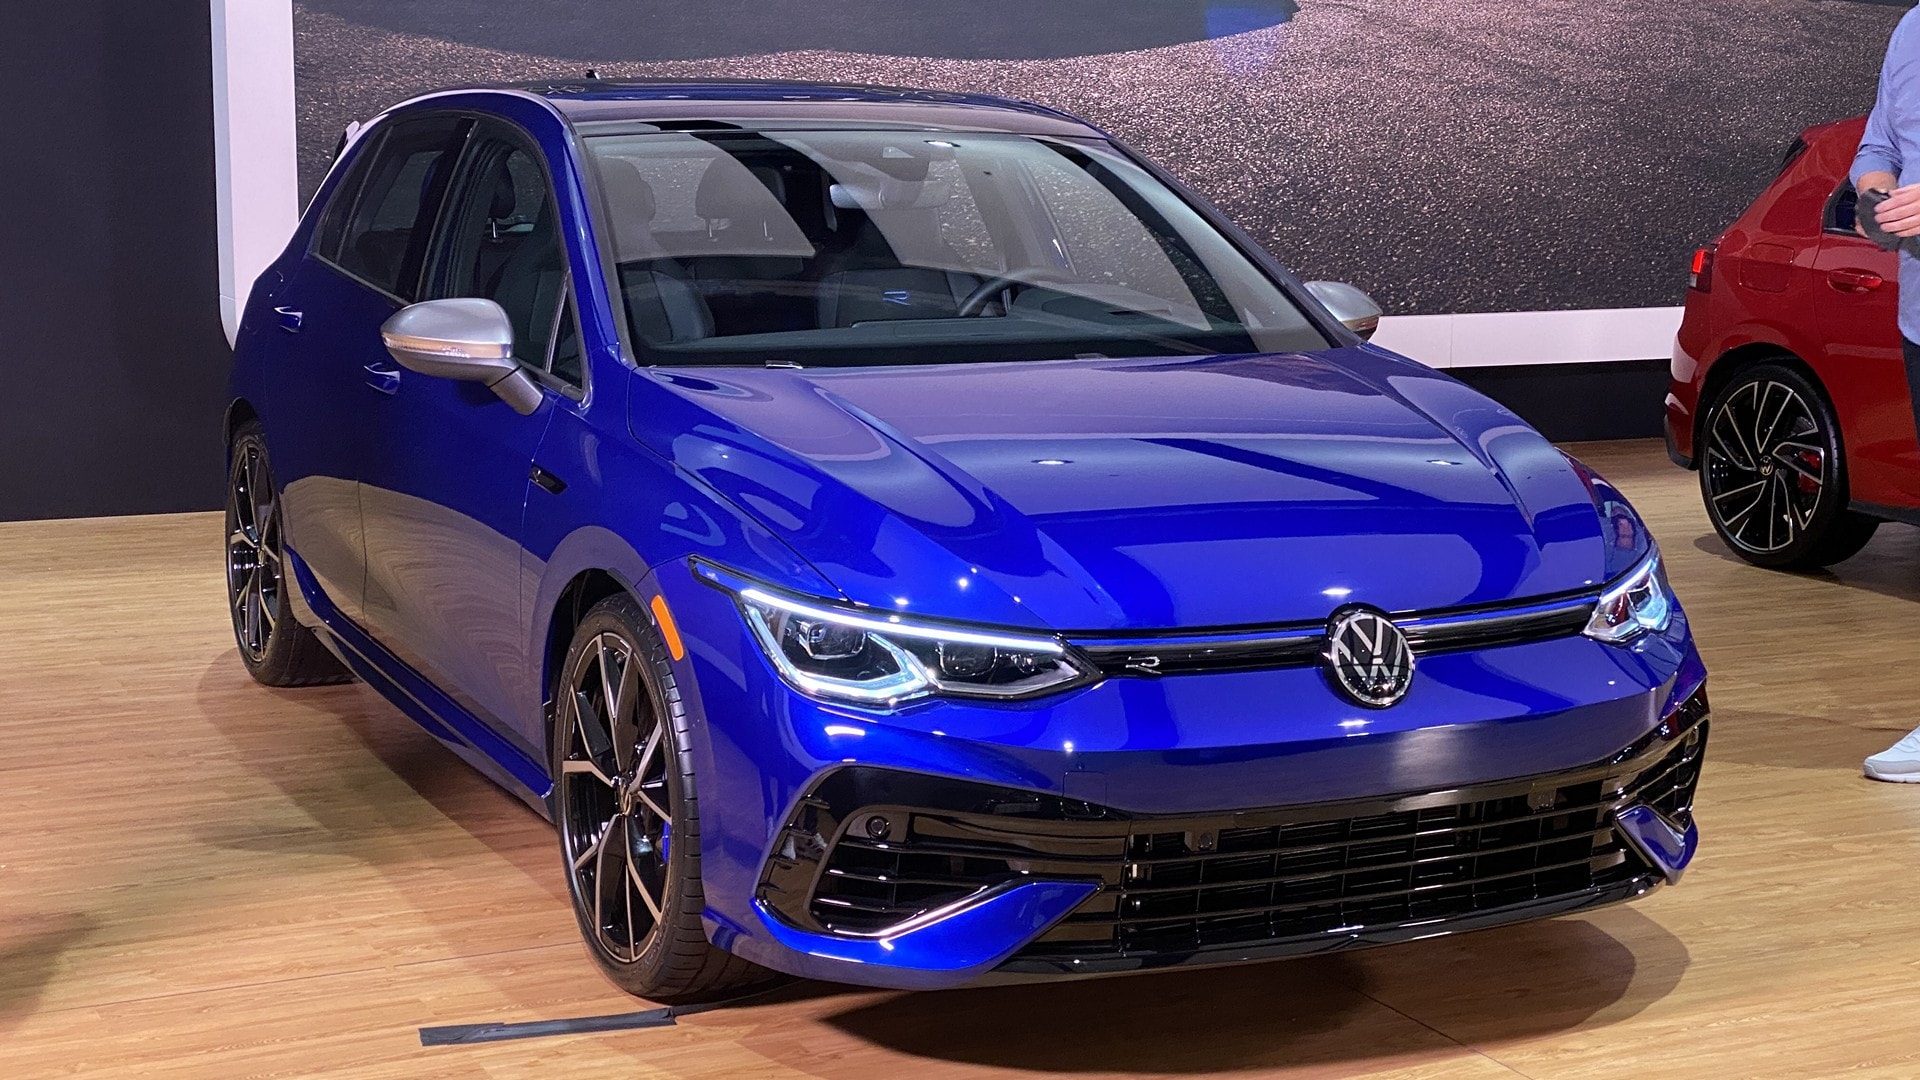 2022 Volkswagen Golf R Debuts in Chicago With 315 HP, Manual and